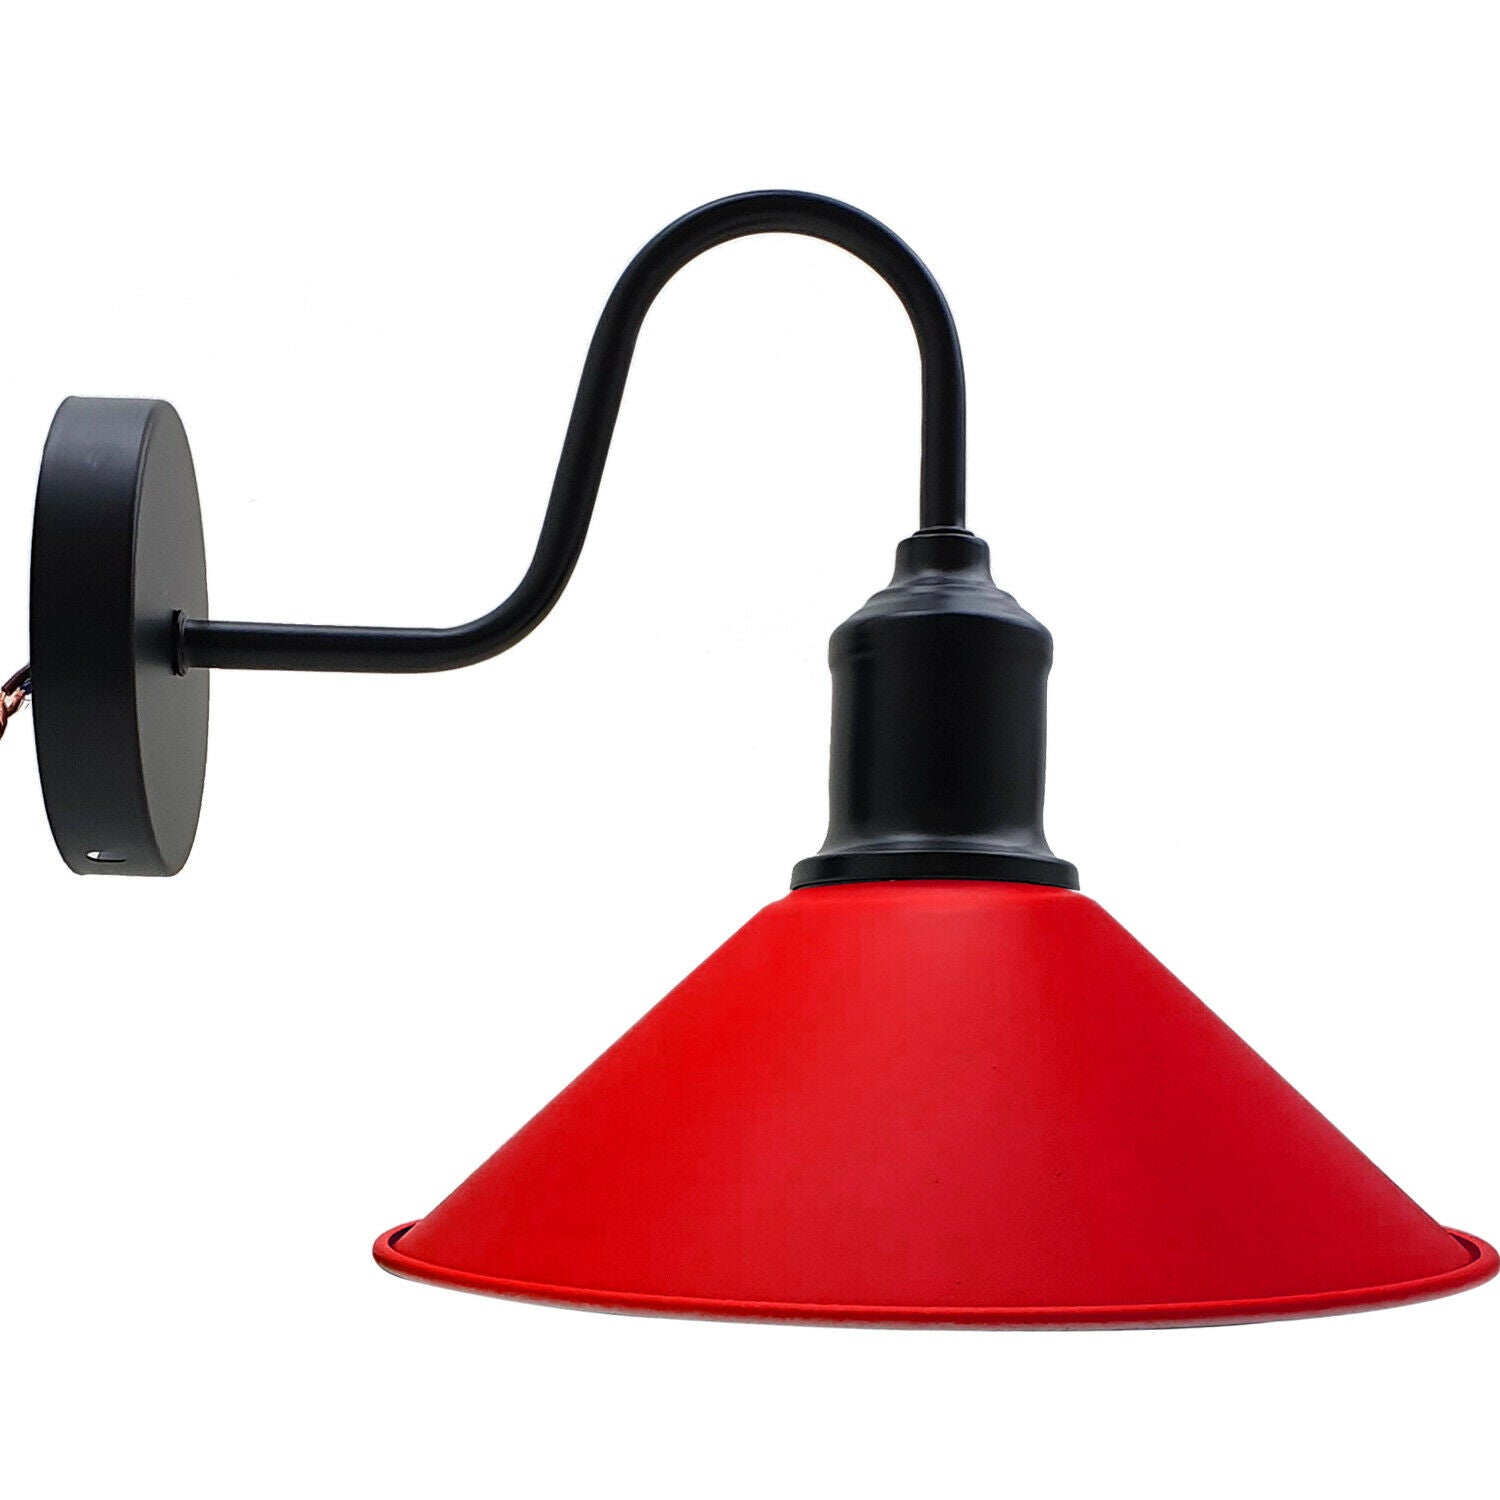 Modern Retro Industrial Red Colour Wall Mounted Lights Rustic Sconce Lamps Fixture~2480 - LEDSone UK Ltd